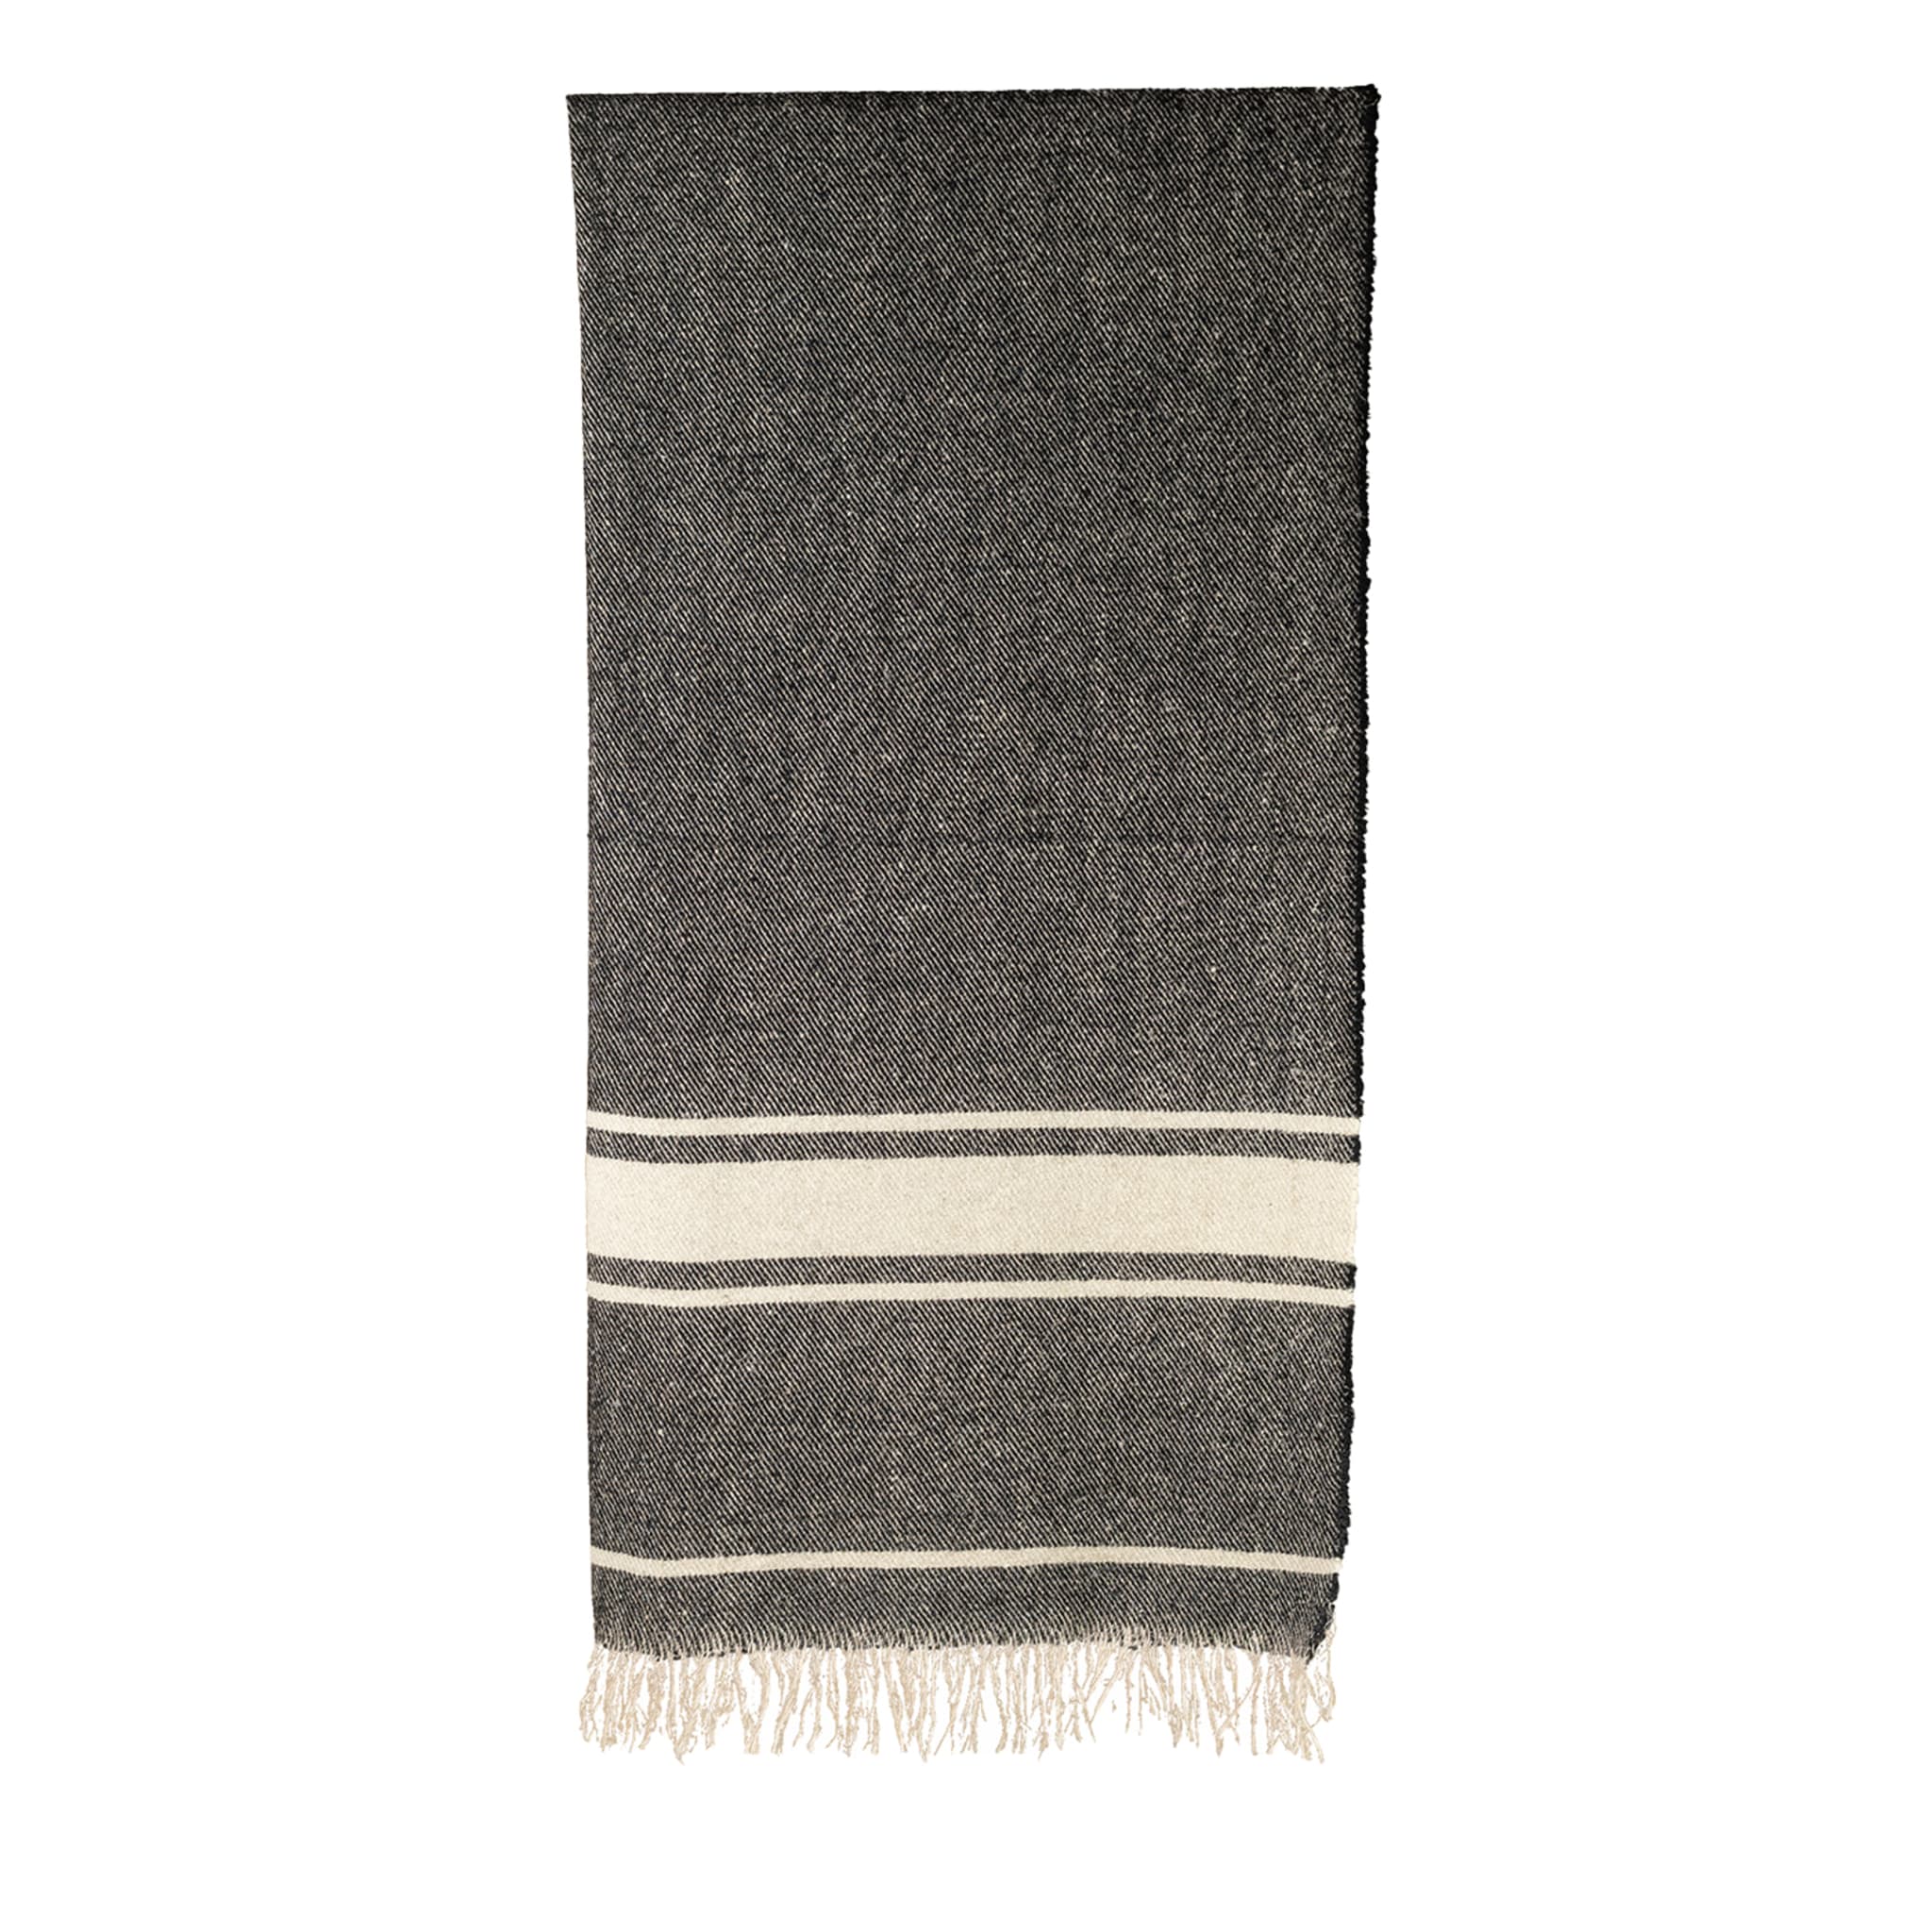 Icario Fringed Striped Black-And-White Blanket - Main view